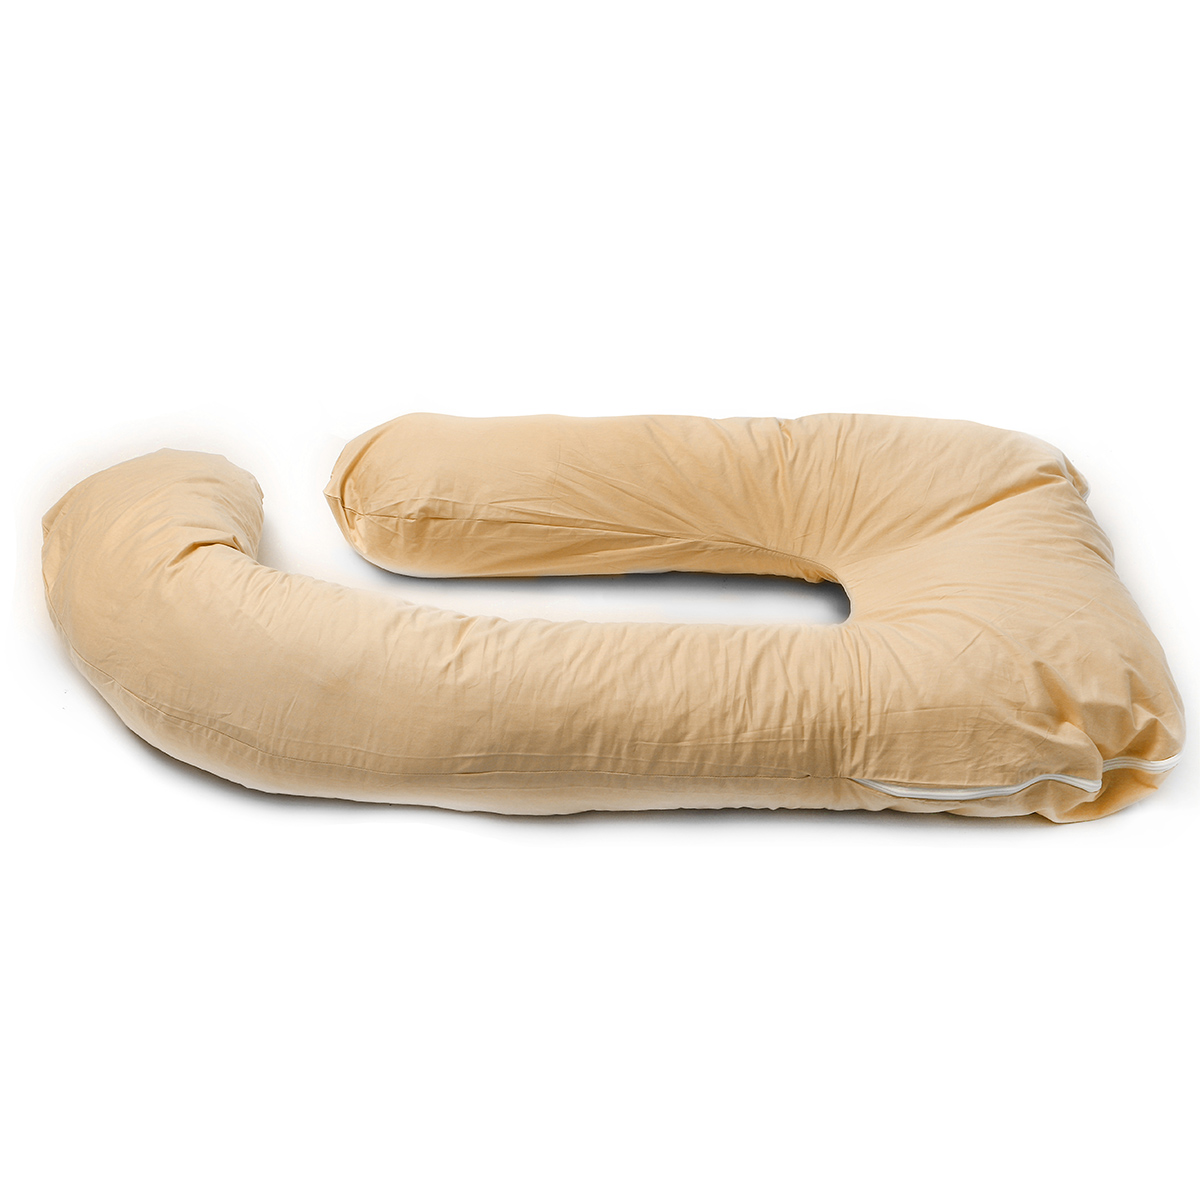 Multi-functional-Mother-Pillow-Side-Sleeper-Pure-Cotton-Removable-Washable-U-shaped-Napping-Pillowca-1809583-7